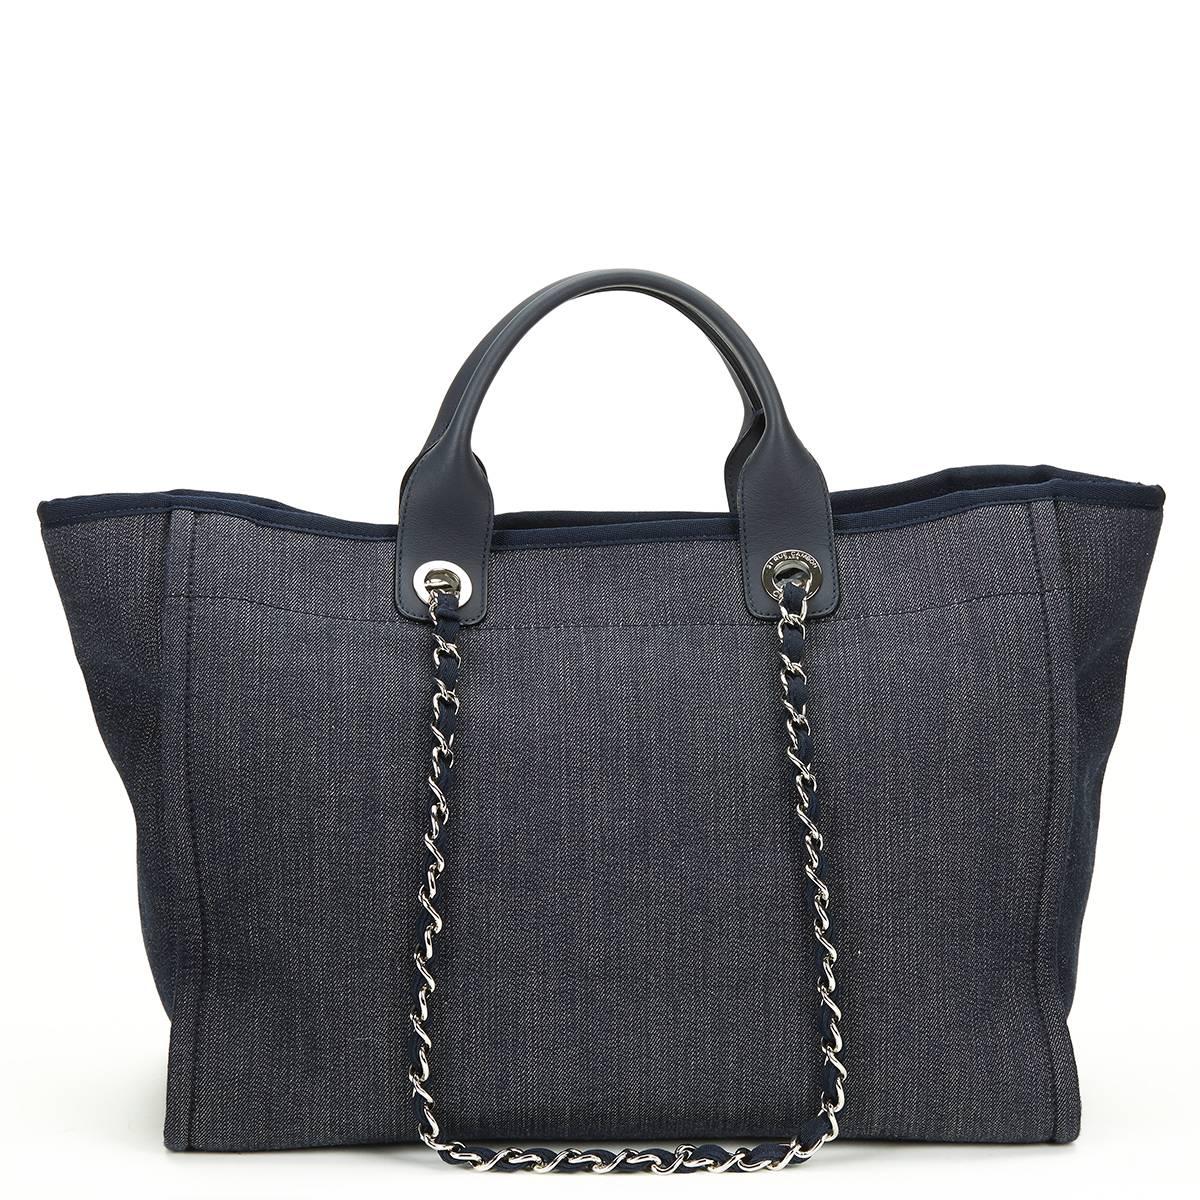 2014 Chanel Navy Canvas Large Deauville Tote 1